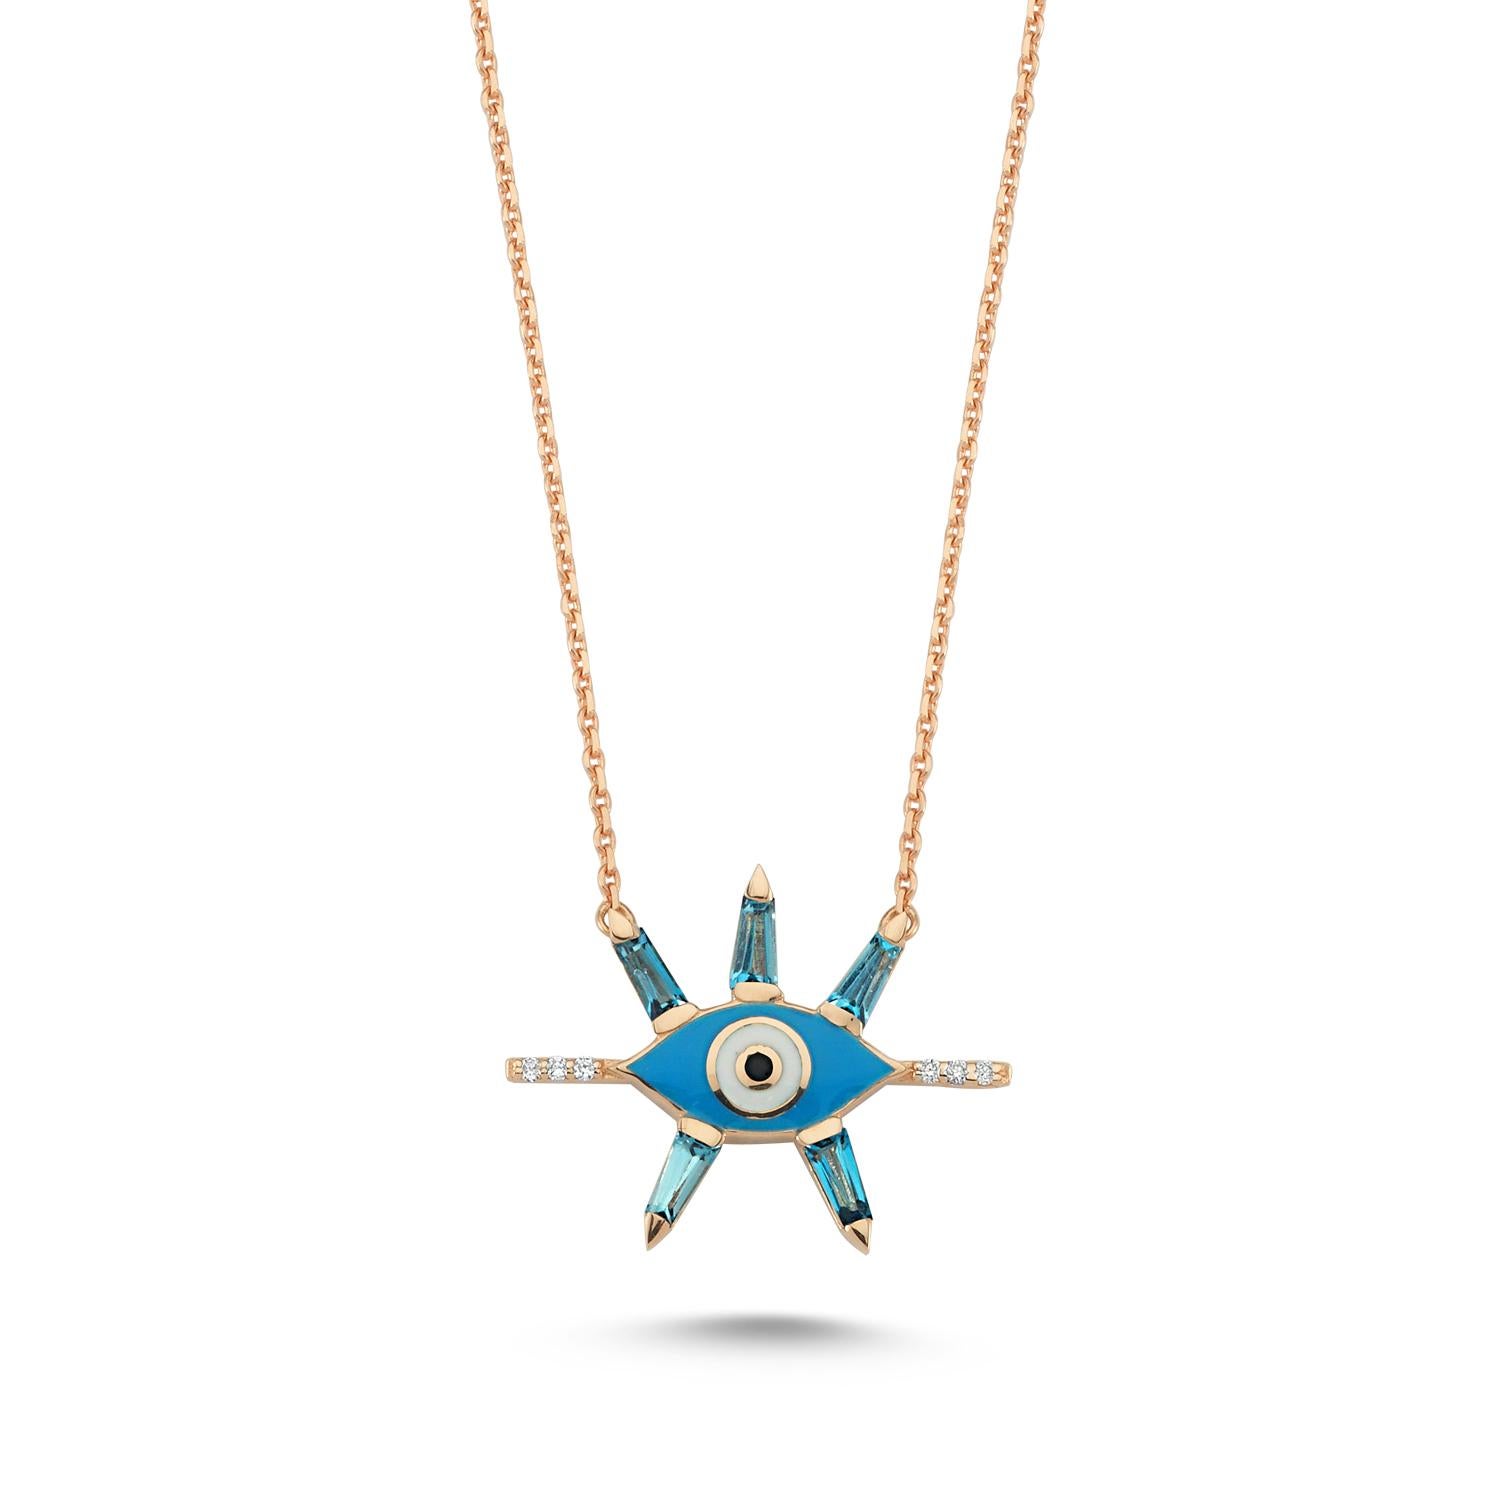 Evil eye necklace with blue topaz, enamel and white diamond by Selda Jewellery

Additional Information:-
Collection: Art of giving collection
14K Rose gold
0.03ct White diamond
Chain length 43cm
Pendant height 1.5cm